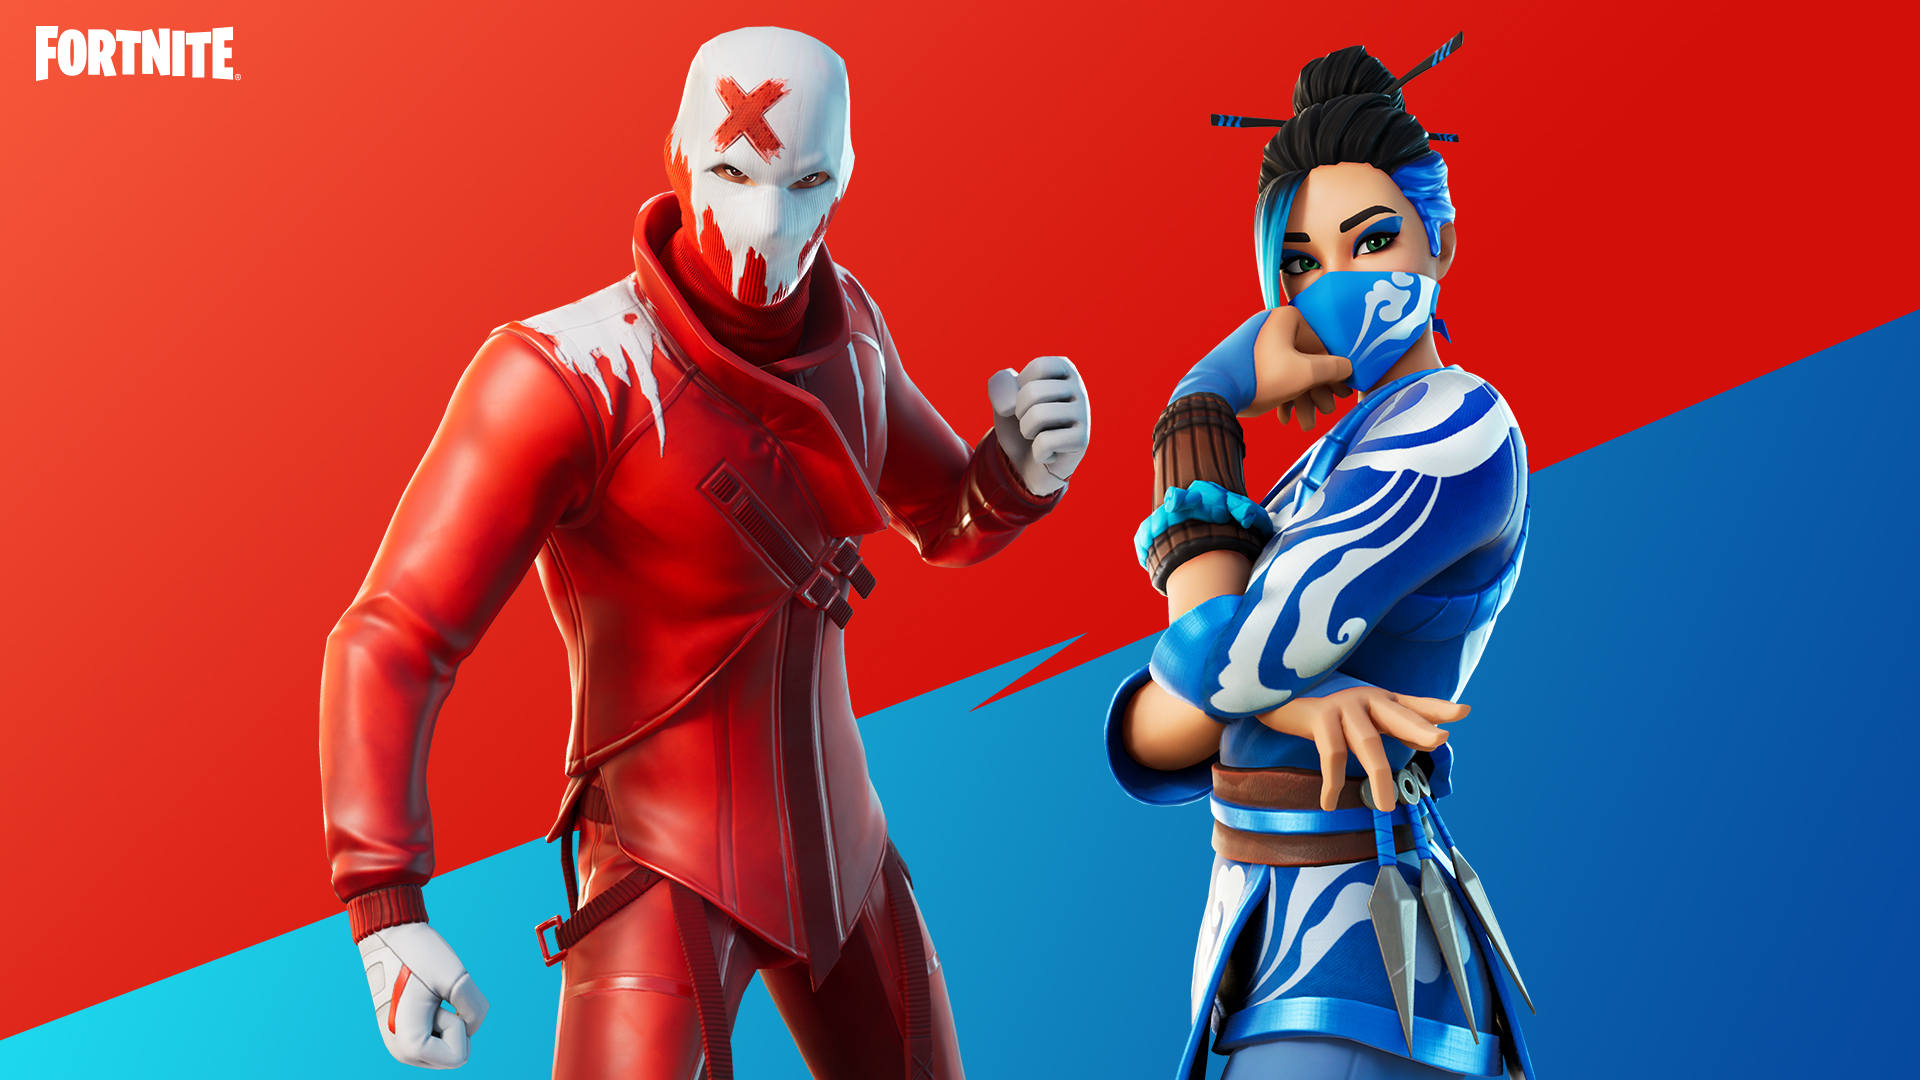 Fortnite Creators on Twitter: "Infinite respawns, strong loadouts and lots  of action! Jump into Red vs Blue Rumble by @BoykaARO. Play it now during Red  vs Blue weekend in the Creative Showcase.